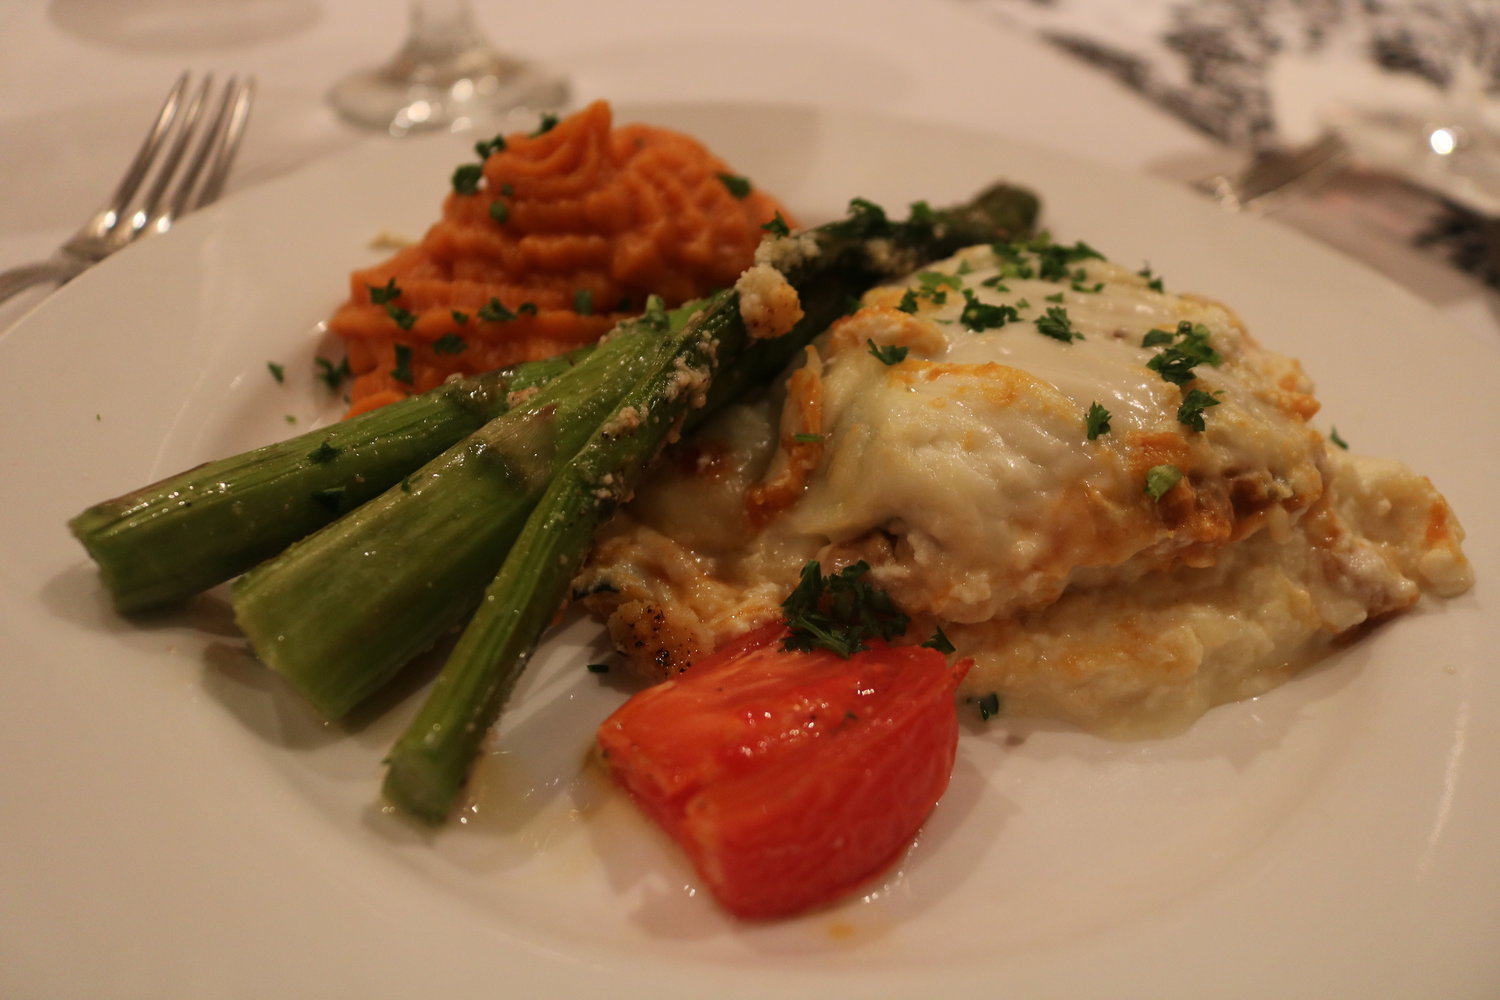 8.	A Fall-inspired pumpkin lasagna was served to guests, with a side of carrot, sweet-potato mash and roasted tomato halves.